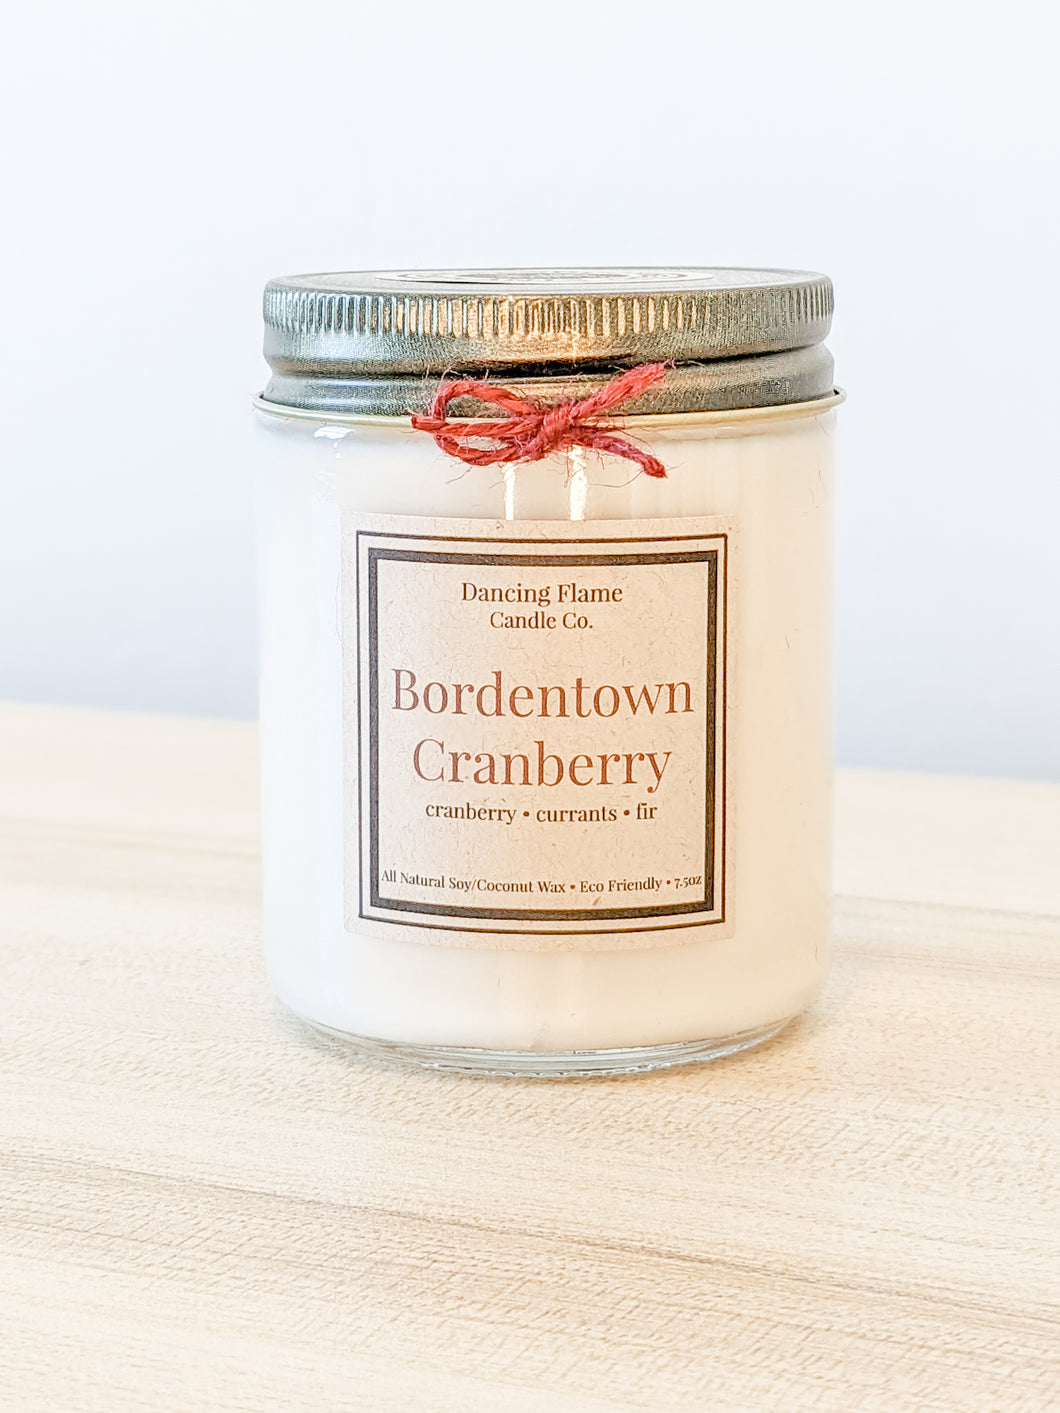 Bordentown Cranberry Soy/Coconut Wax Candle